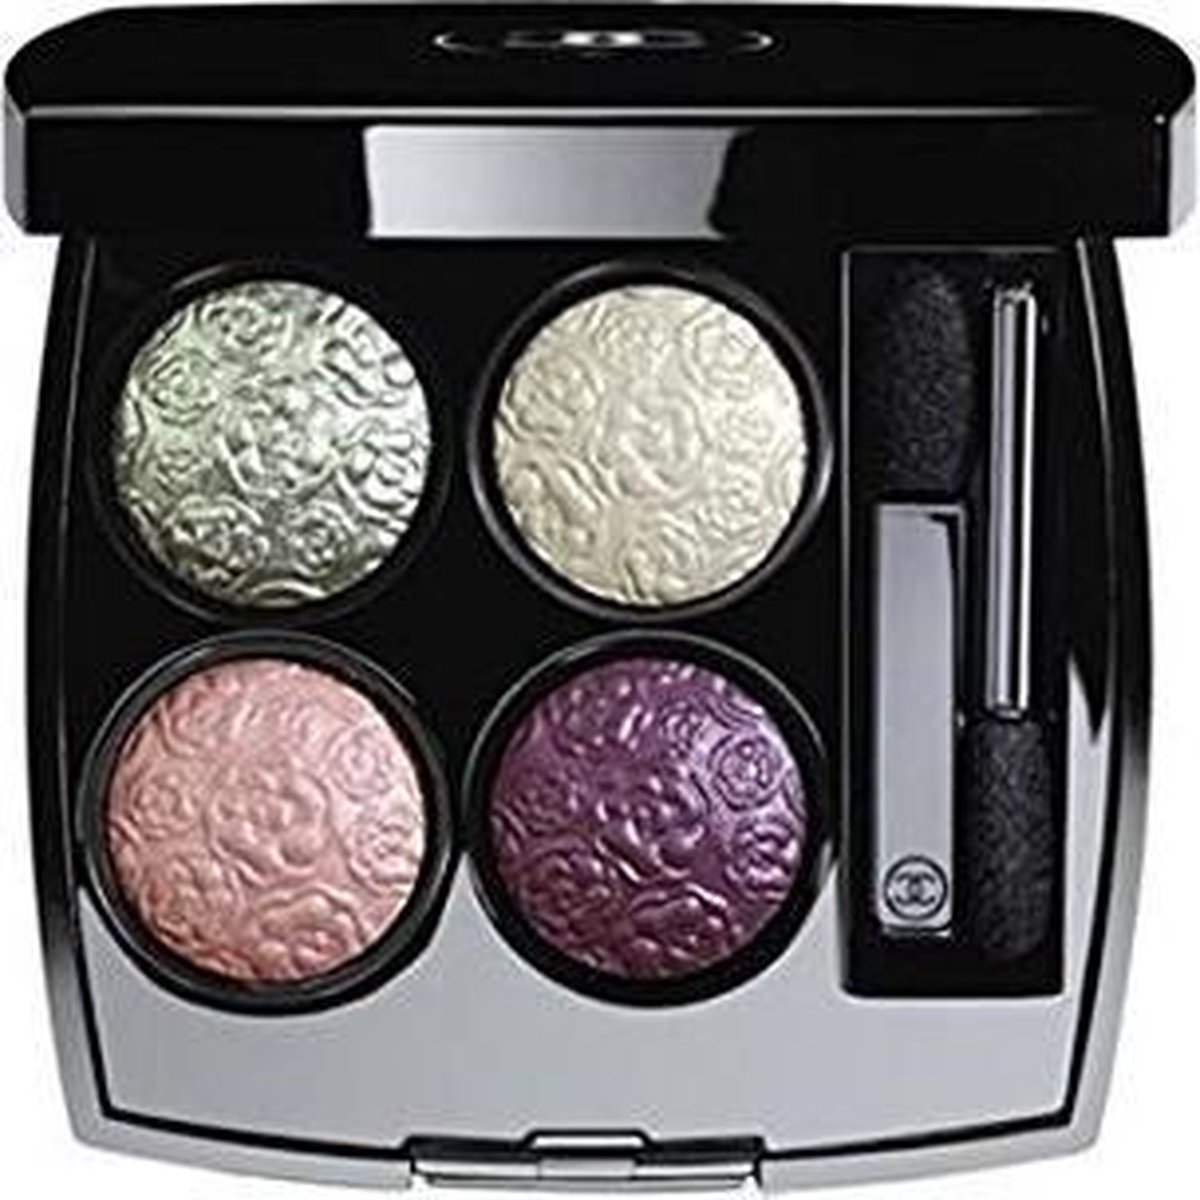 CHANEL, Makeup, Chanel Les 4 Ombres Multieffect Quadra Eyeshadow Tisse  Jazz